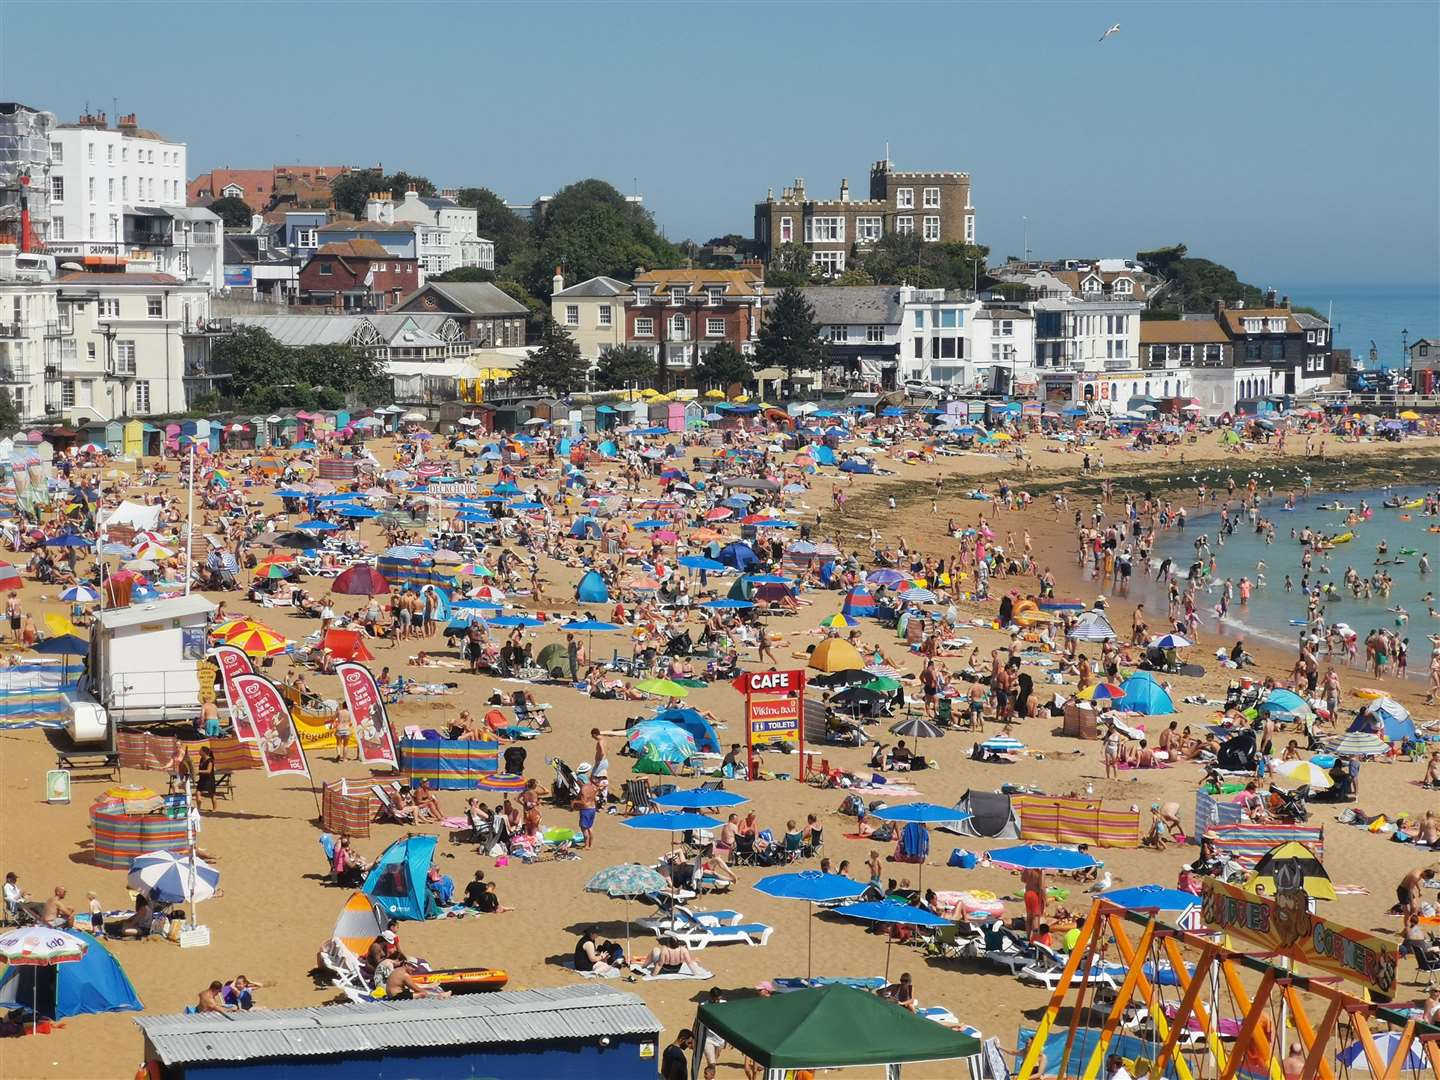 Bathers have been warned to stay out of the sea at Viking Bay, Broadstairs